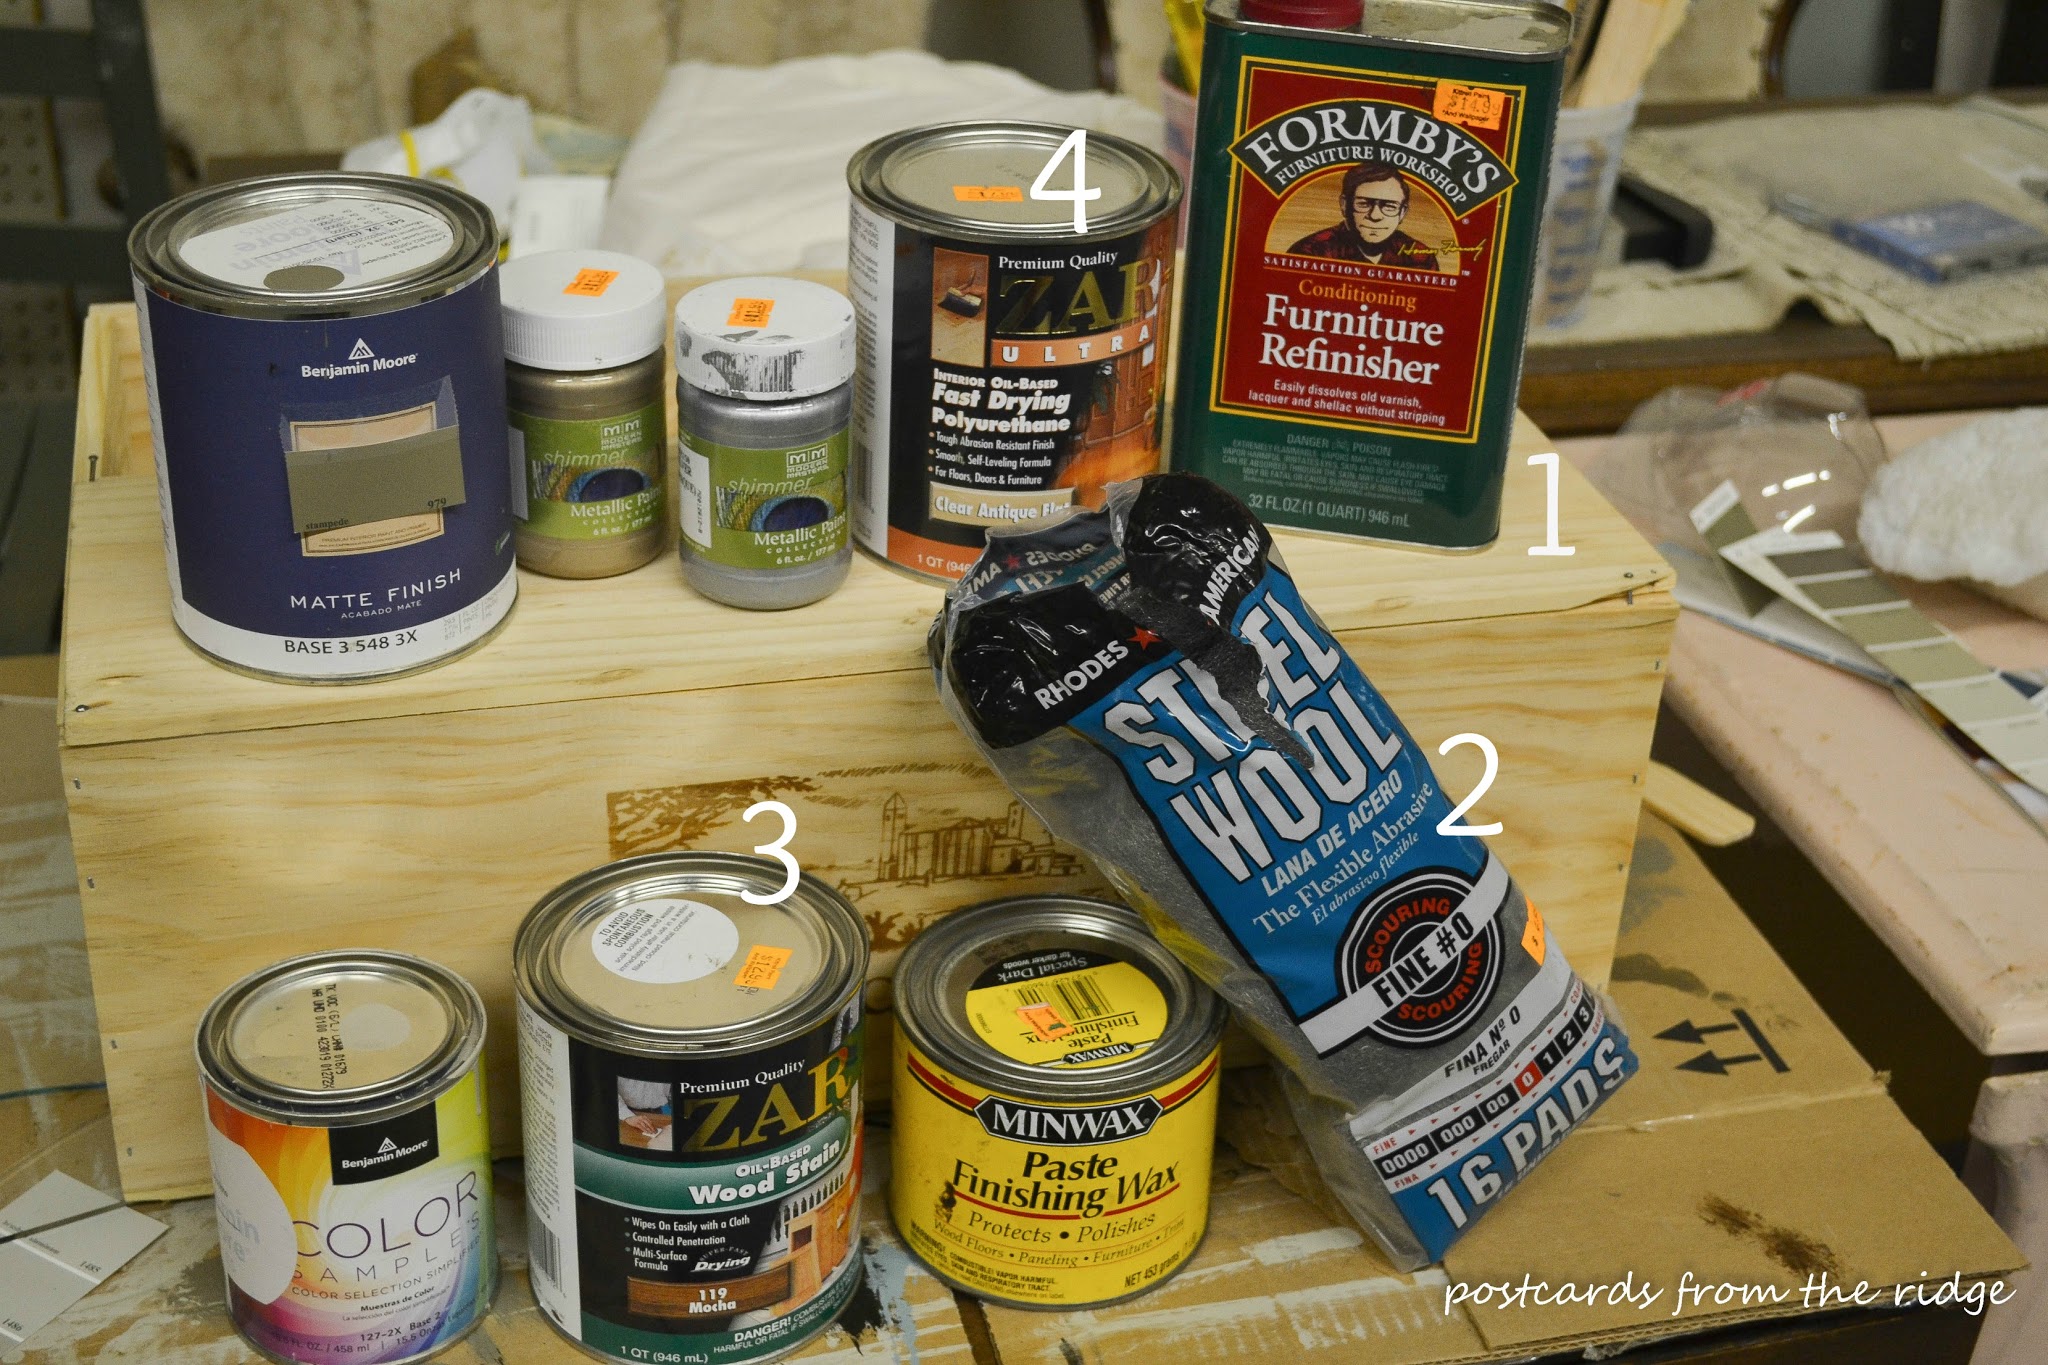 Postcards from the Ridge: How to refinish furniture tutorial with complete instructions and products needed.